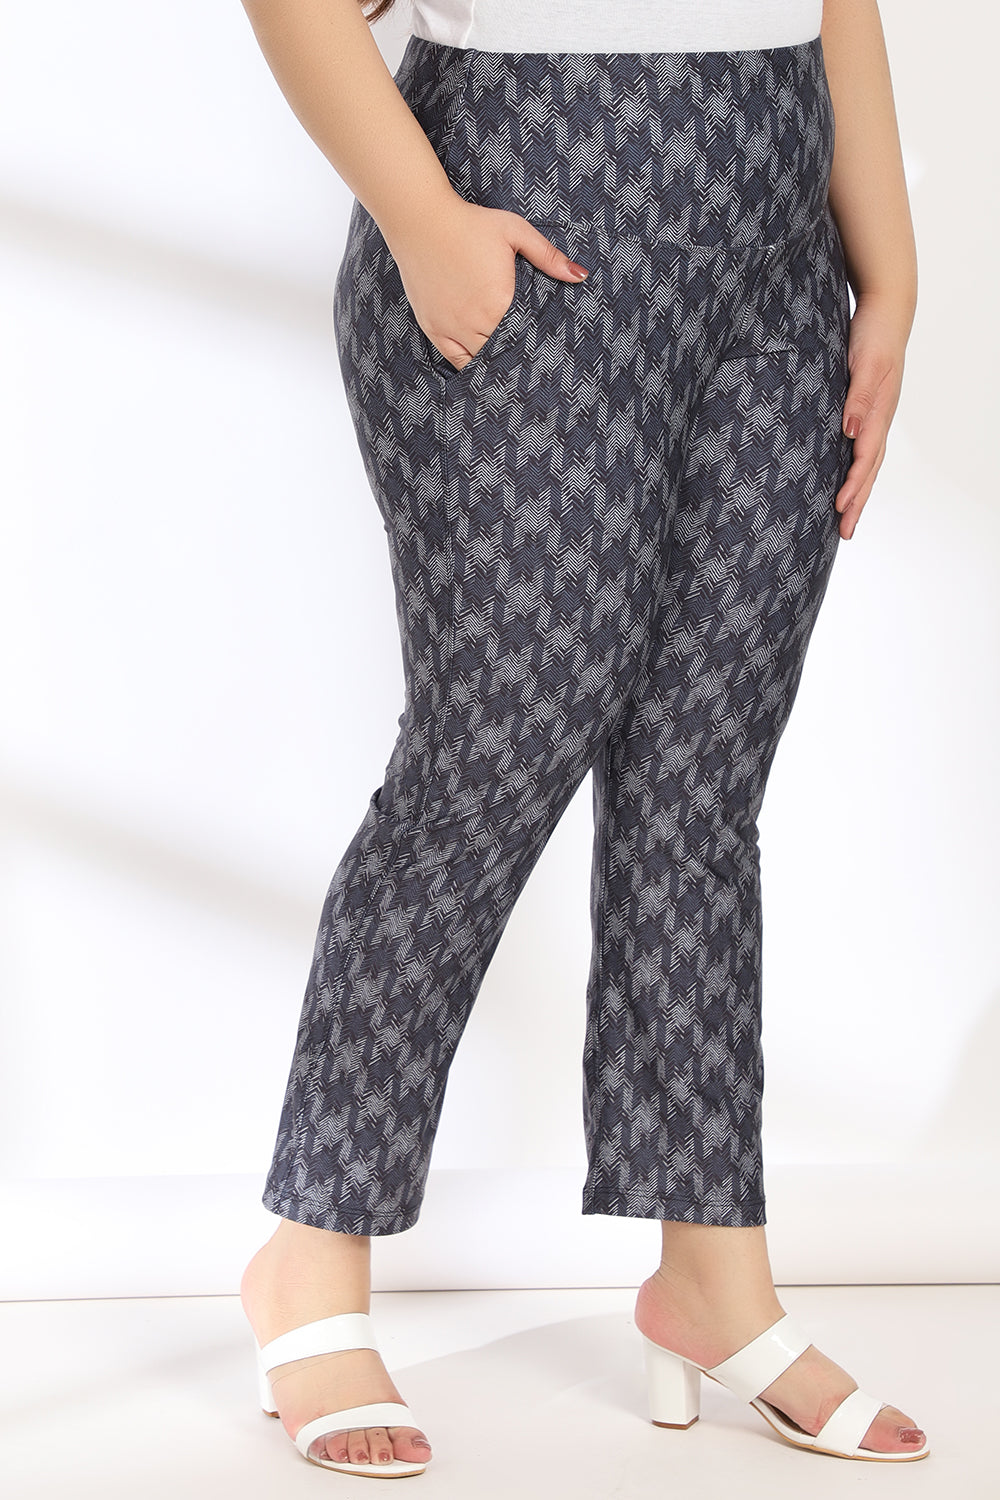 Blue White Houndstooth Tummy Shaper Printed Pants for Women